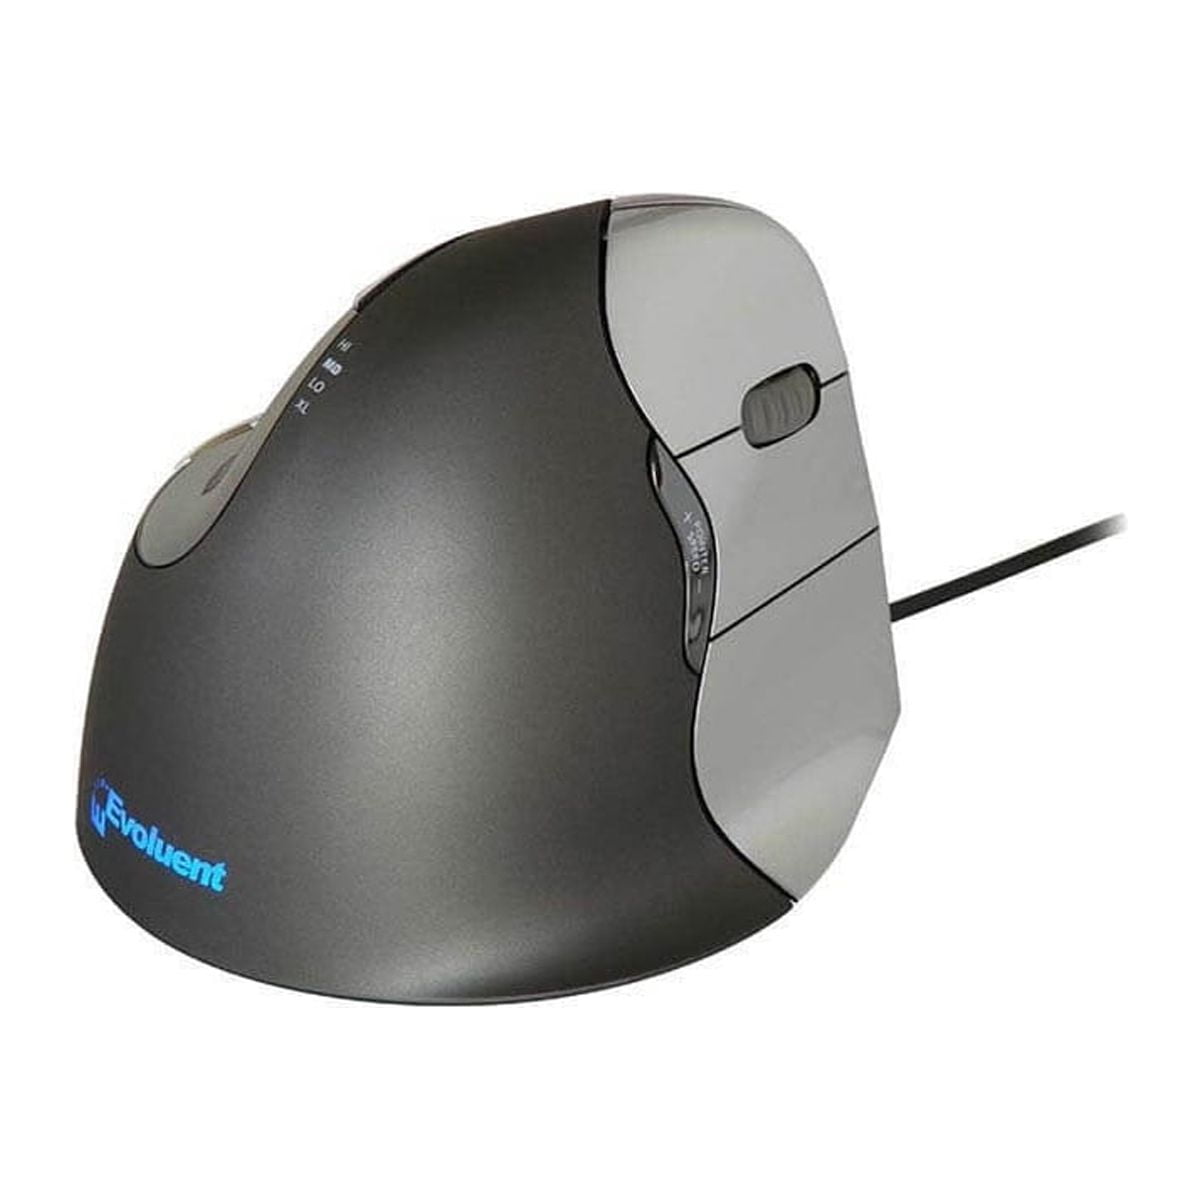 Evoluent VM4R Vertical Mouse 4 Right Handed Wired 